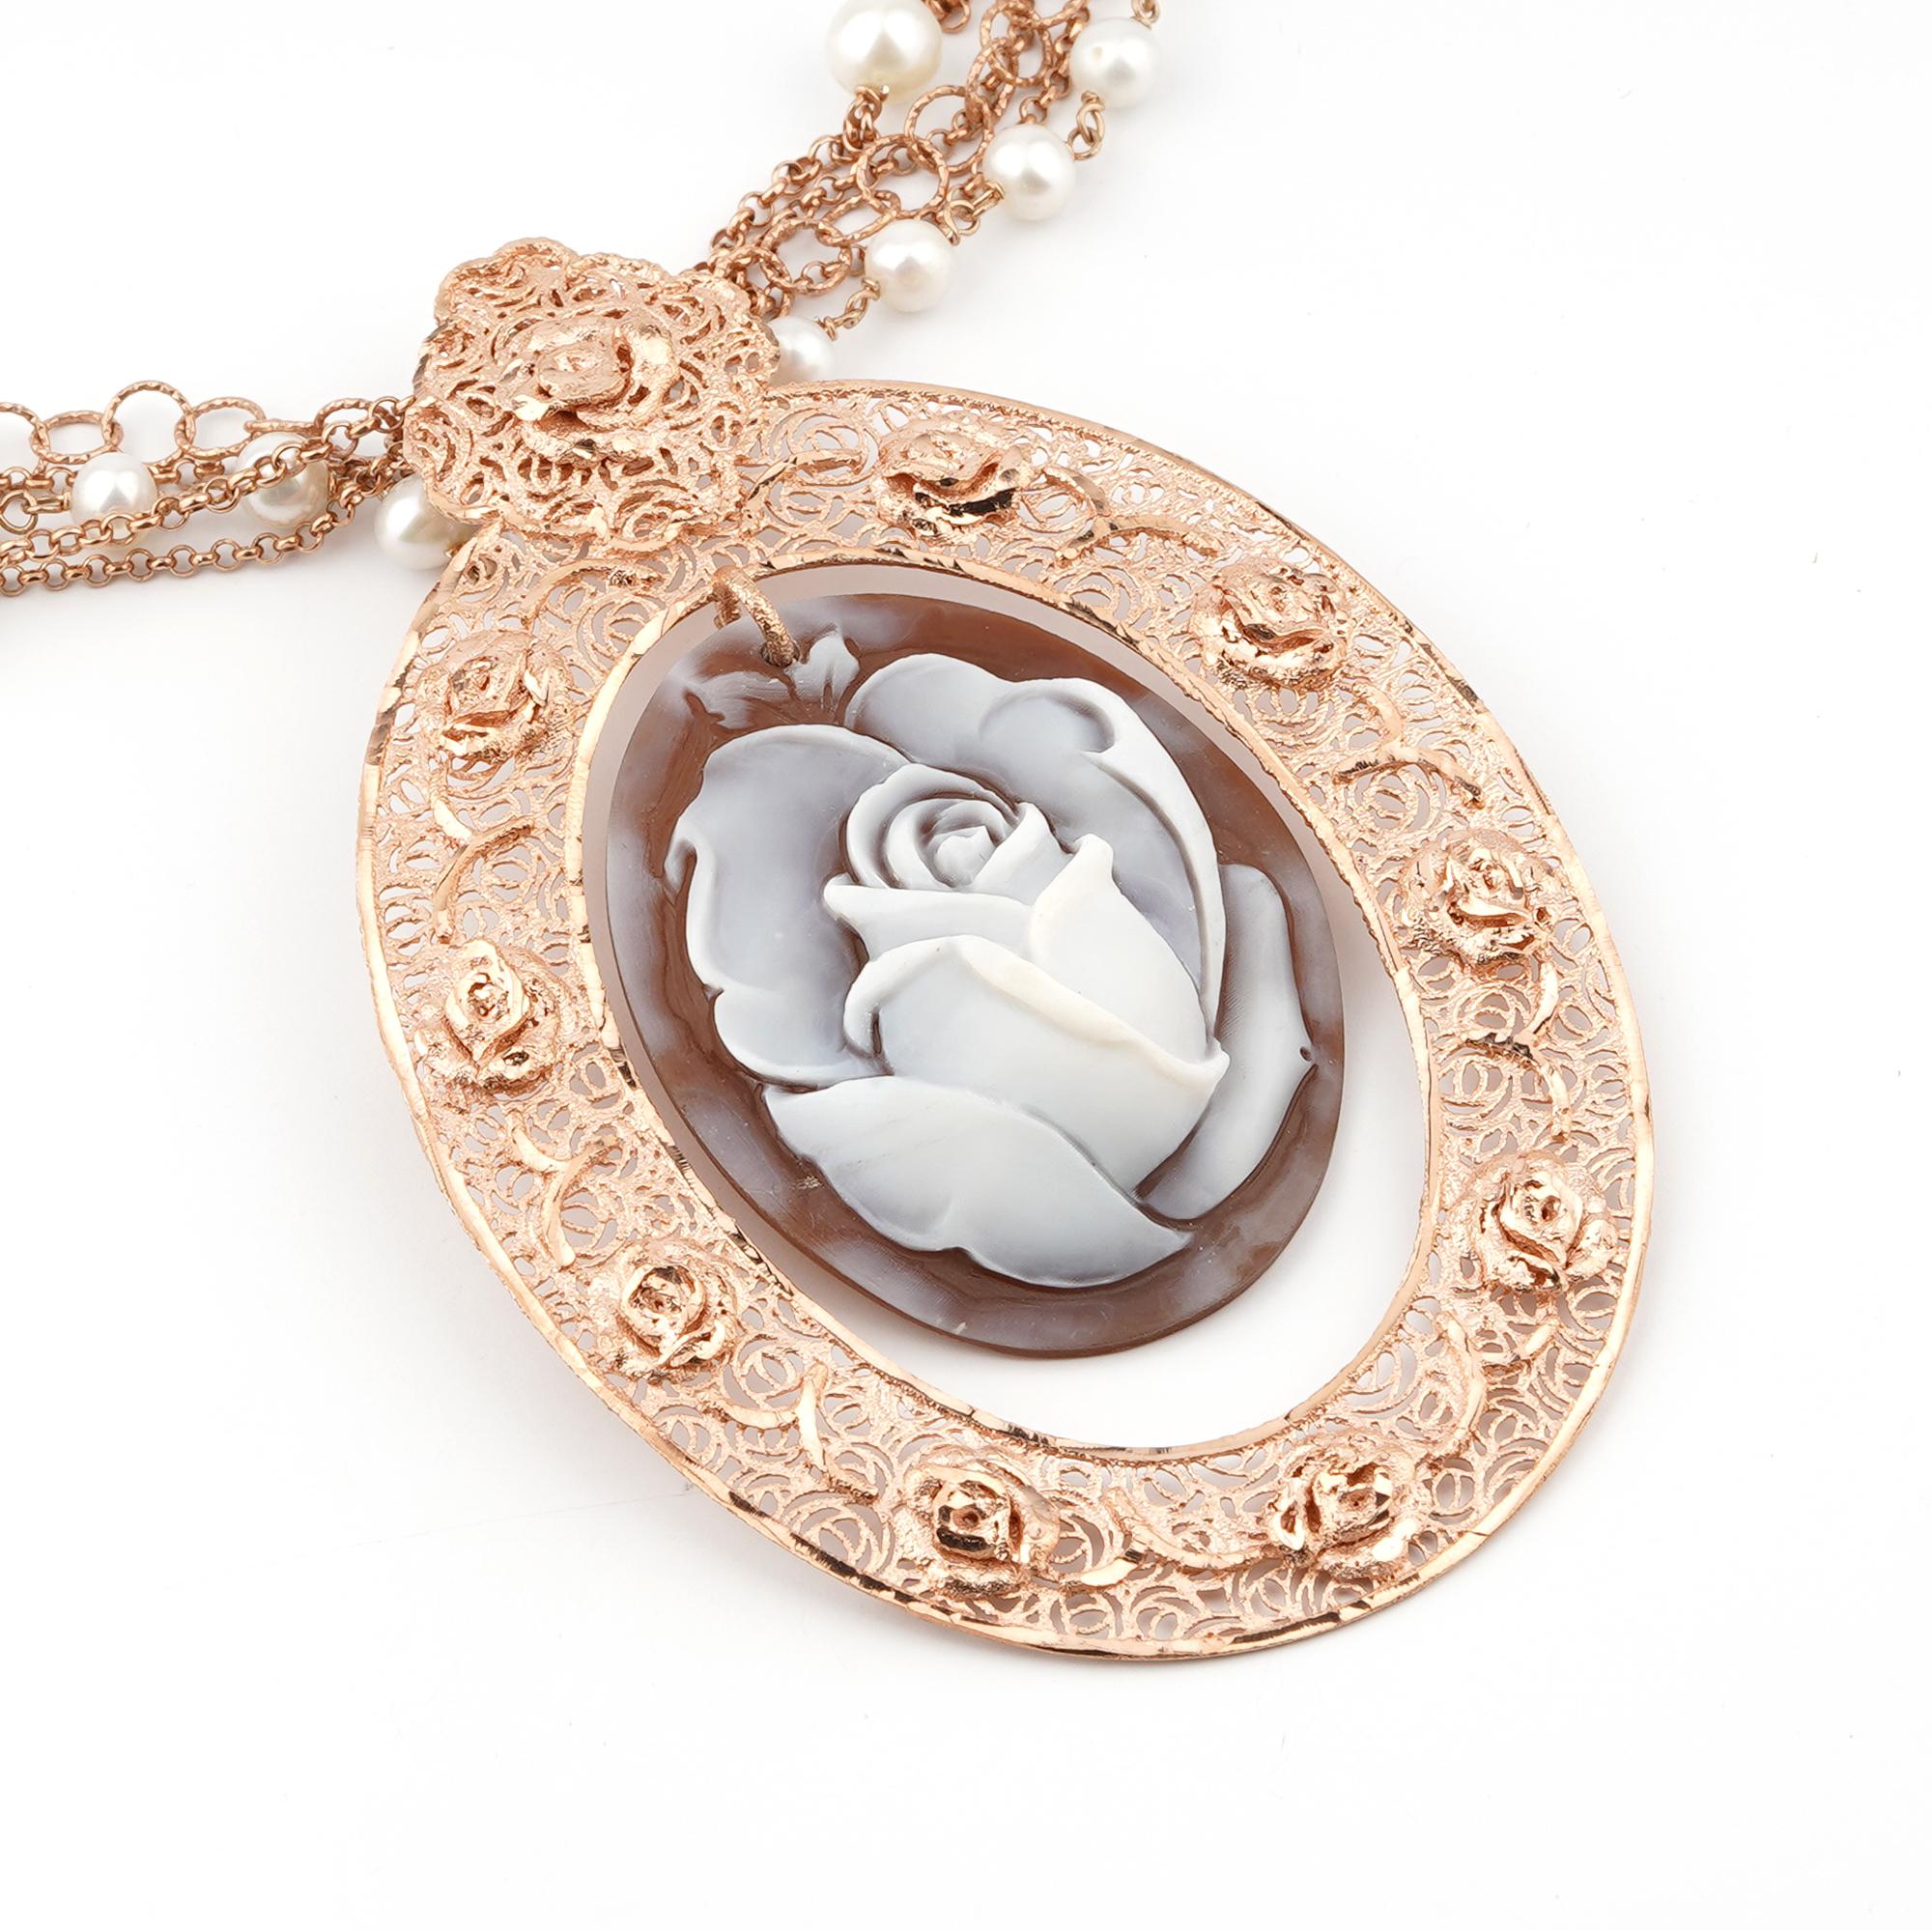 18Kt Rose Gold Plated 925 Sterling Silver Sea Shell 45mm Cameo Necklace 95cm. Fully handcarved Rose on a sea shell cameo set in a 18kt Rose Gold plated silver pendant necklace with black onyx. Carvings are performed by our master artisans with